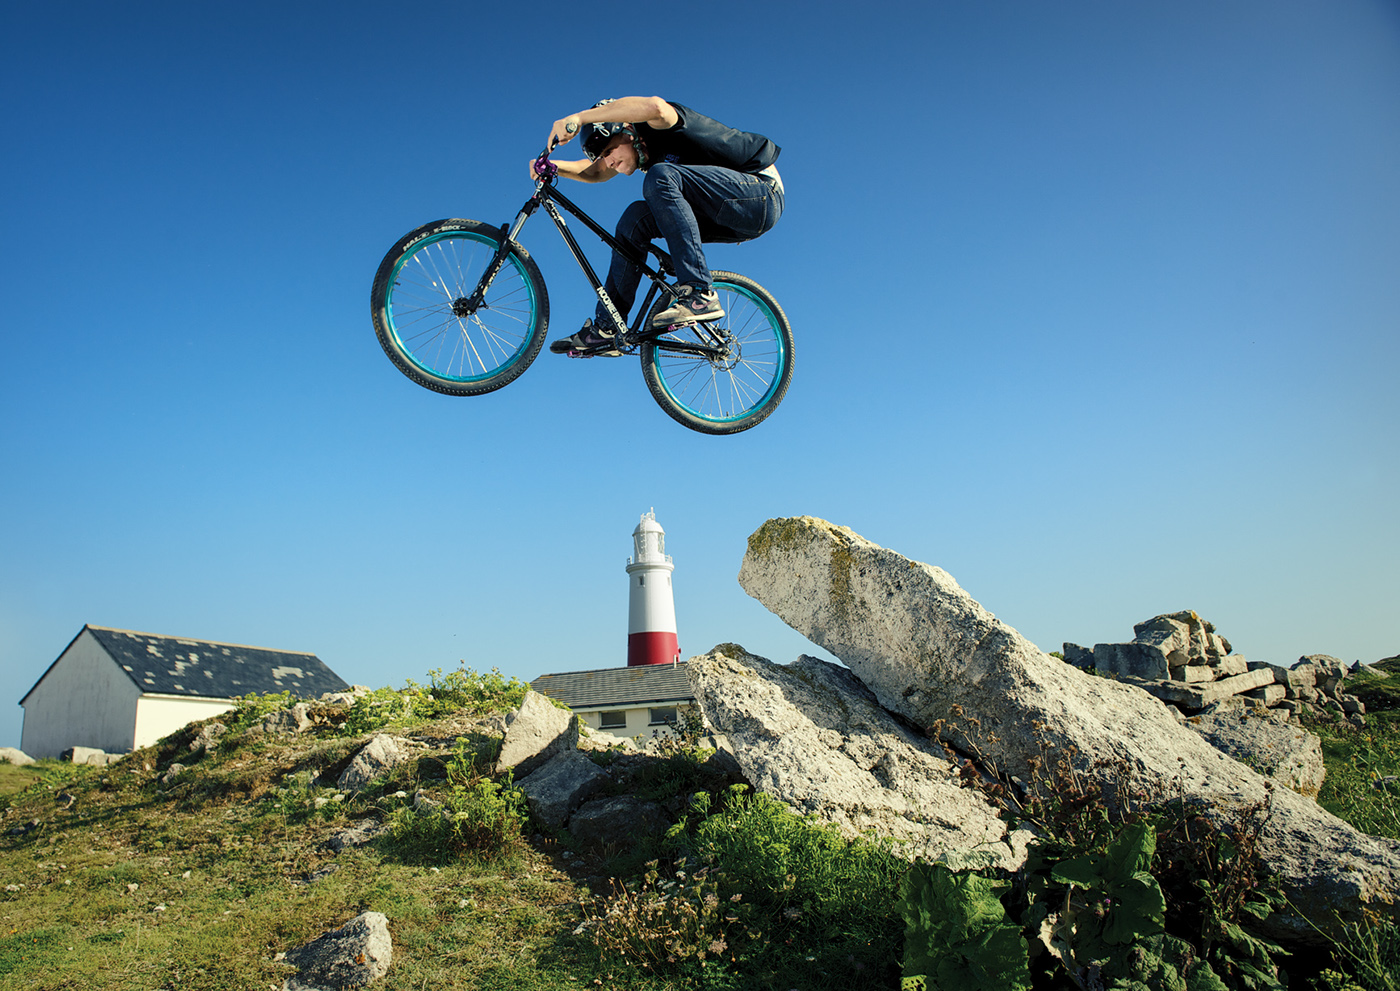 bikes trials riders people sports extreme sports colour editorial